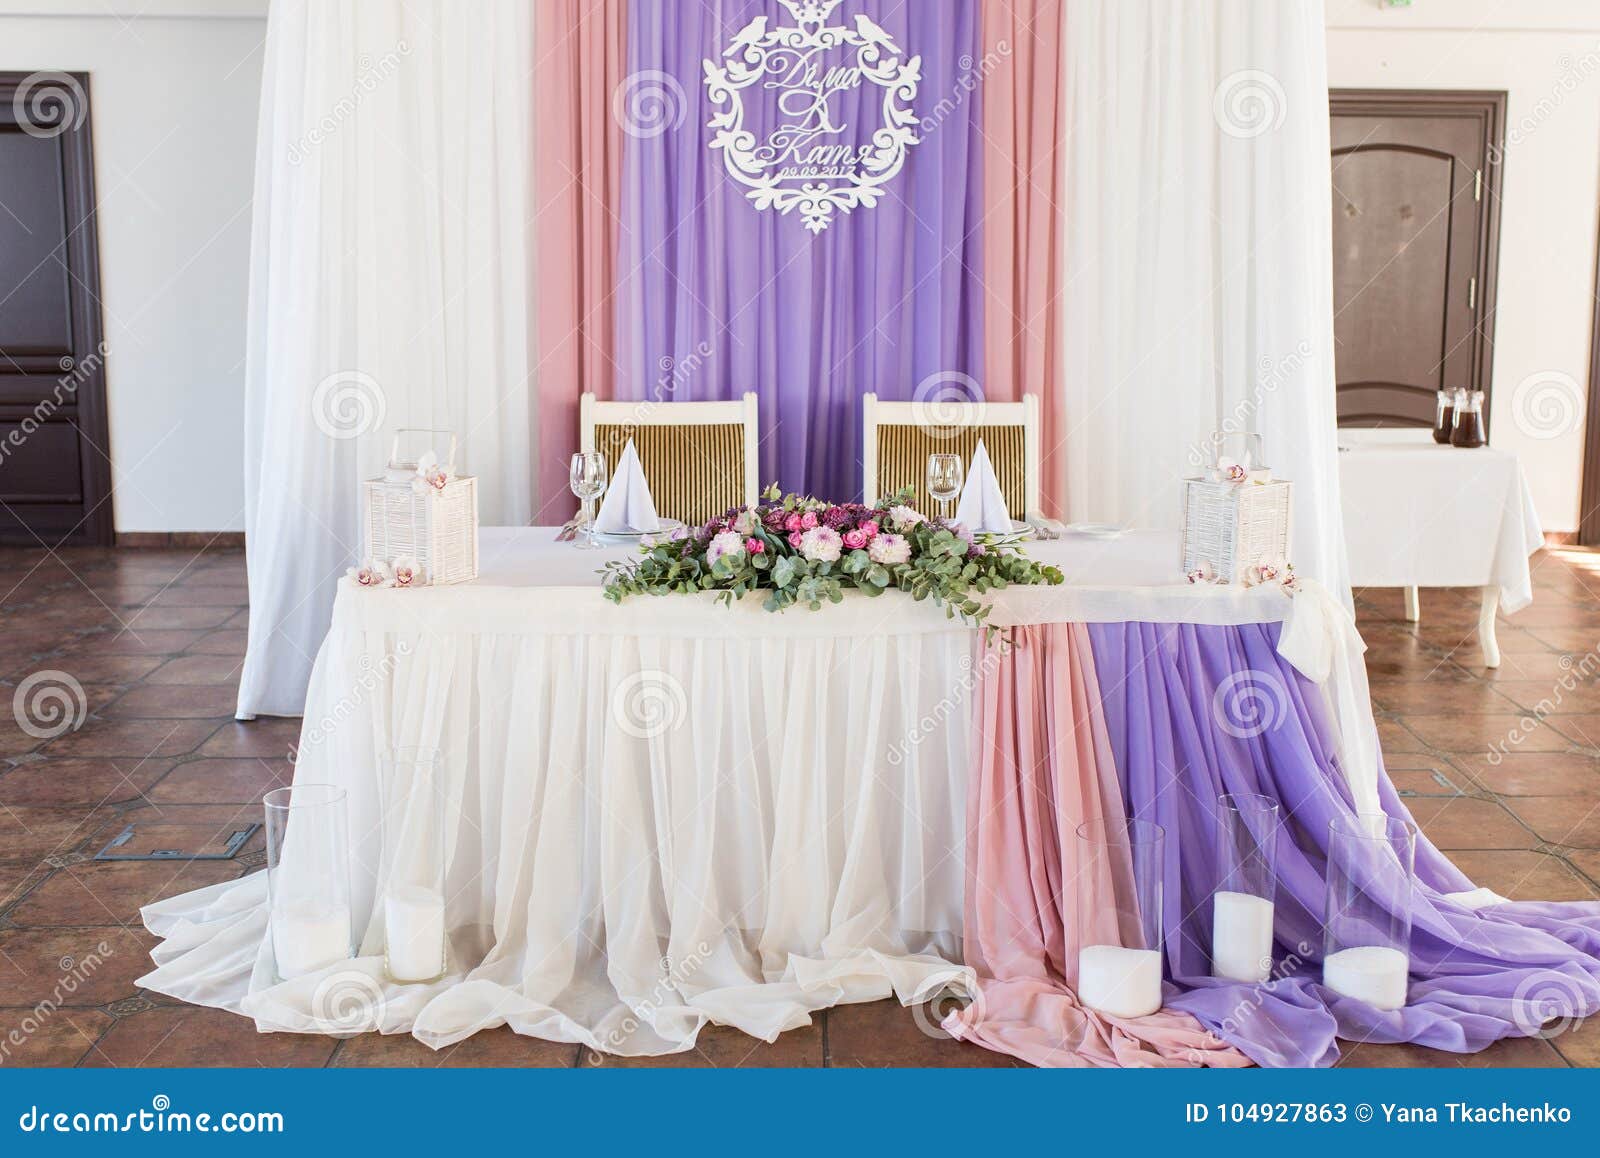 Served Wedding Banquet Table In The Restaurant Decorated White Pink